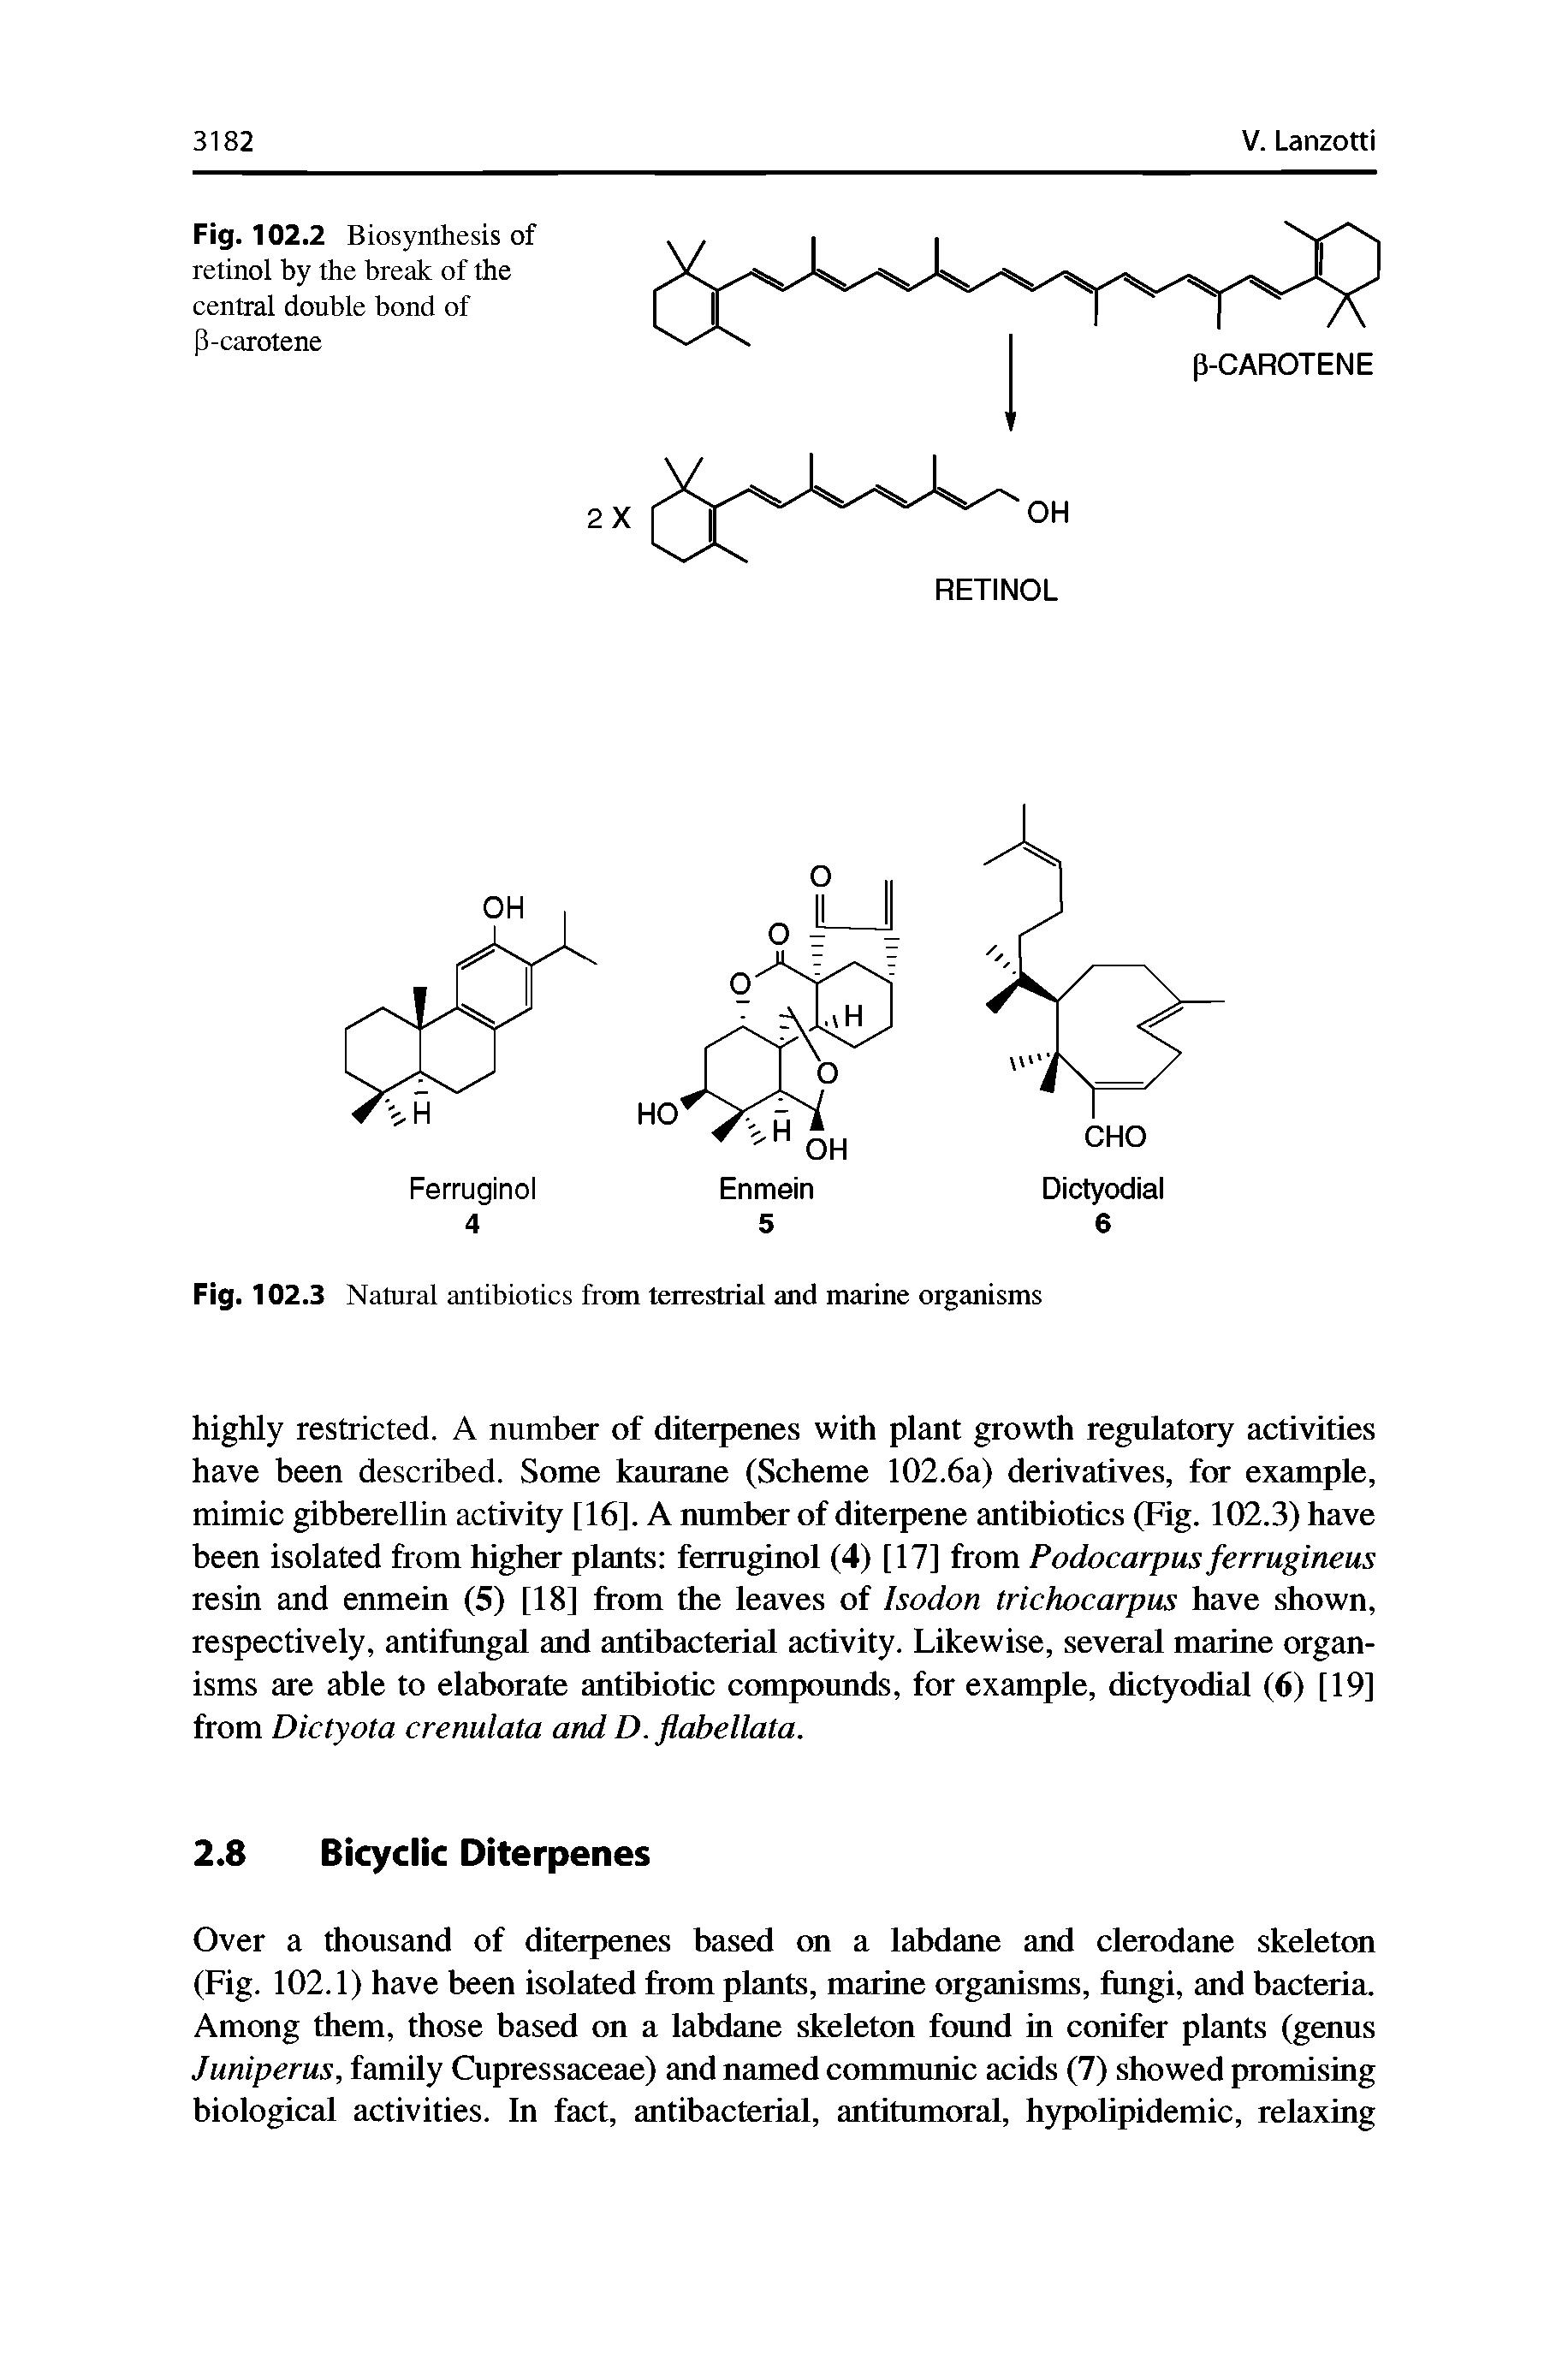 Fig. 102.2 Biosynthesis of retinol by the break of the central double bond of P-carotene...